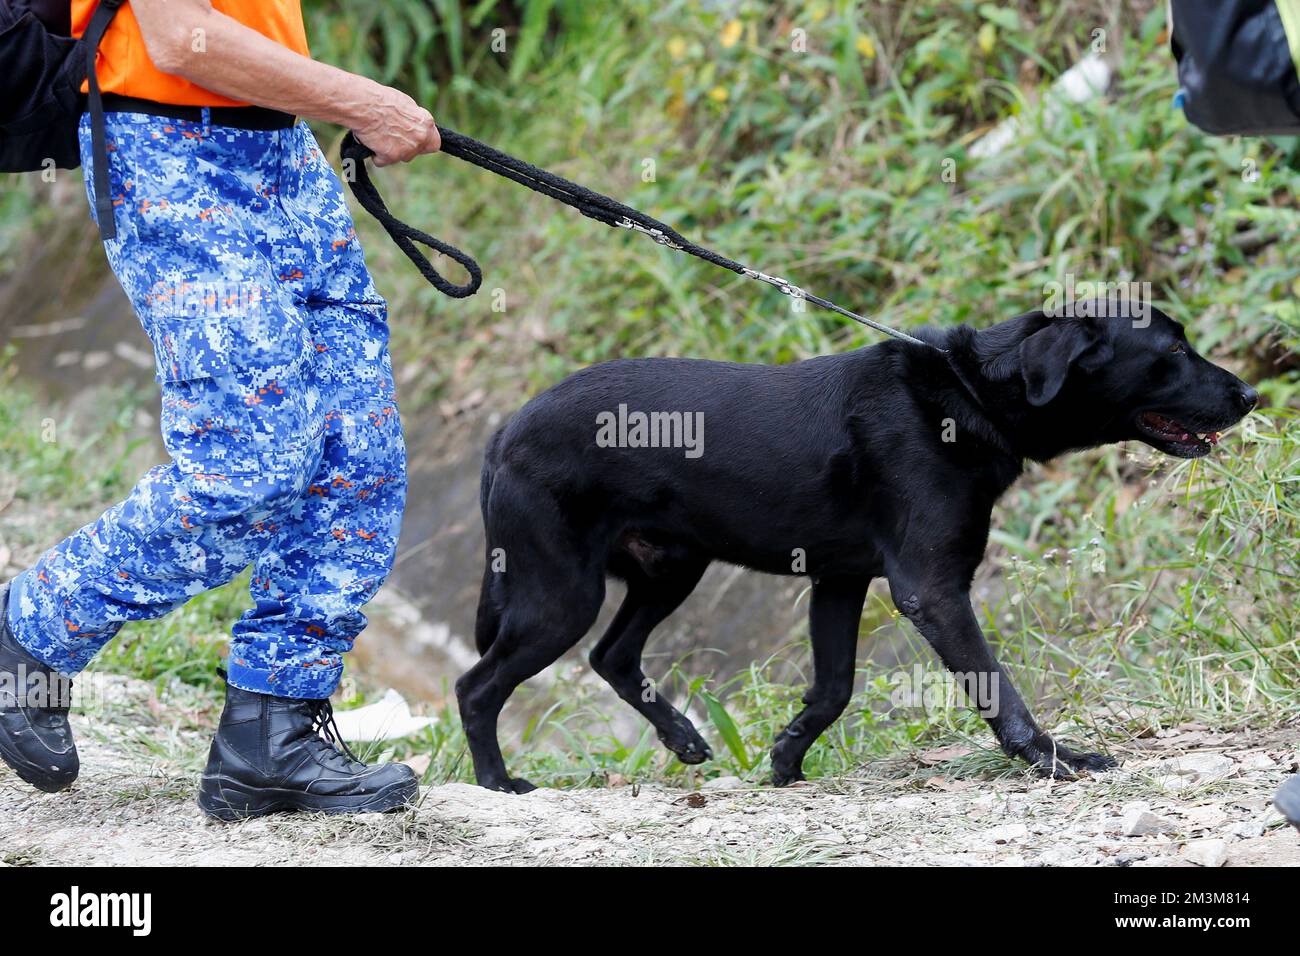 A rescue crew member uses a sniffer dog to aid in search for victims of landslide in Batang Kali, Selangor state, Malaysia December 16, 2022. REUTERS/Lai Seng Sin Stock Photo